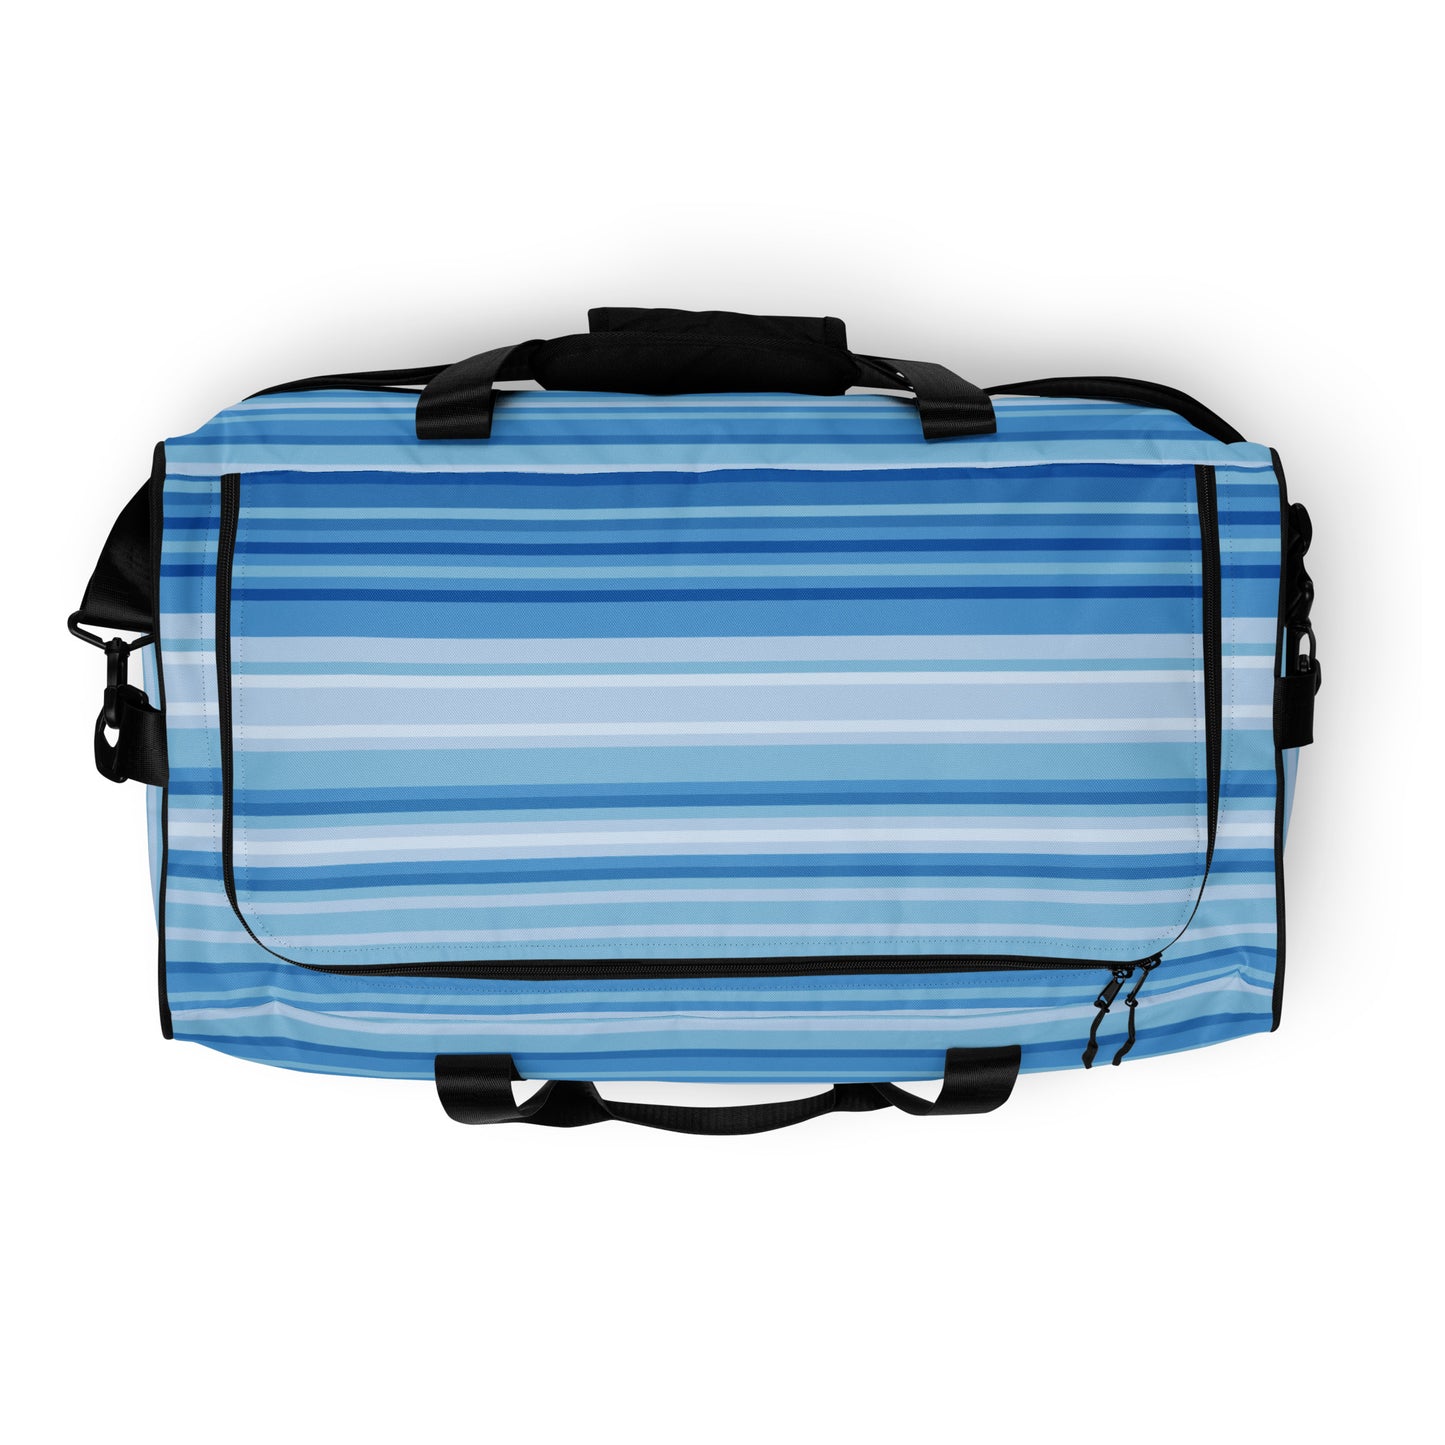 Climate Change Global Warming Stripes - Sustainably Made Duffle bag